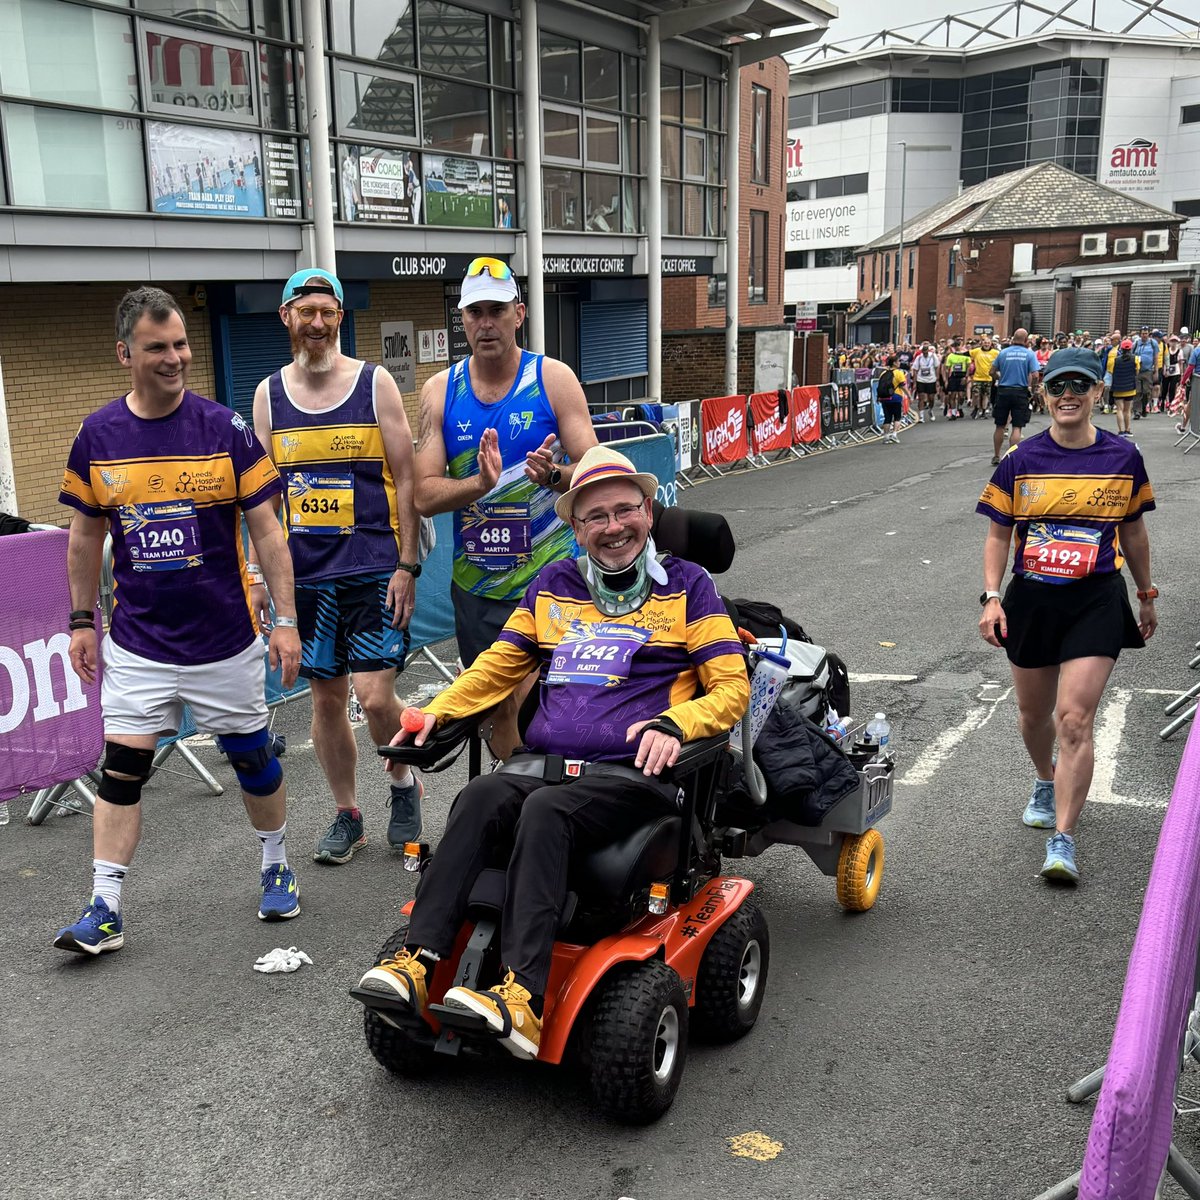 THE MARATHON HAS BEGUN! 💜 Thank you to all our runners and fundraisers today - every penny you raise will get us closer to making the Rob Burrow Centre for MND a reality 💜